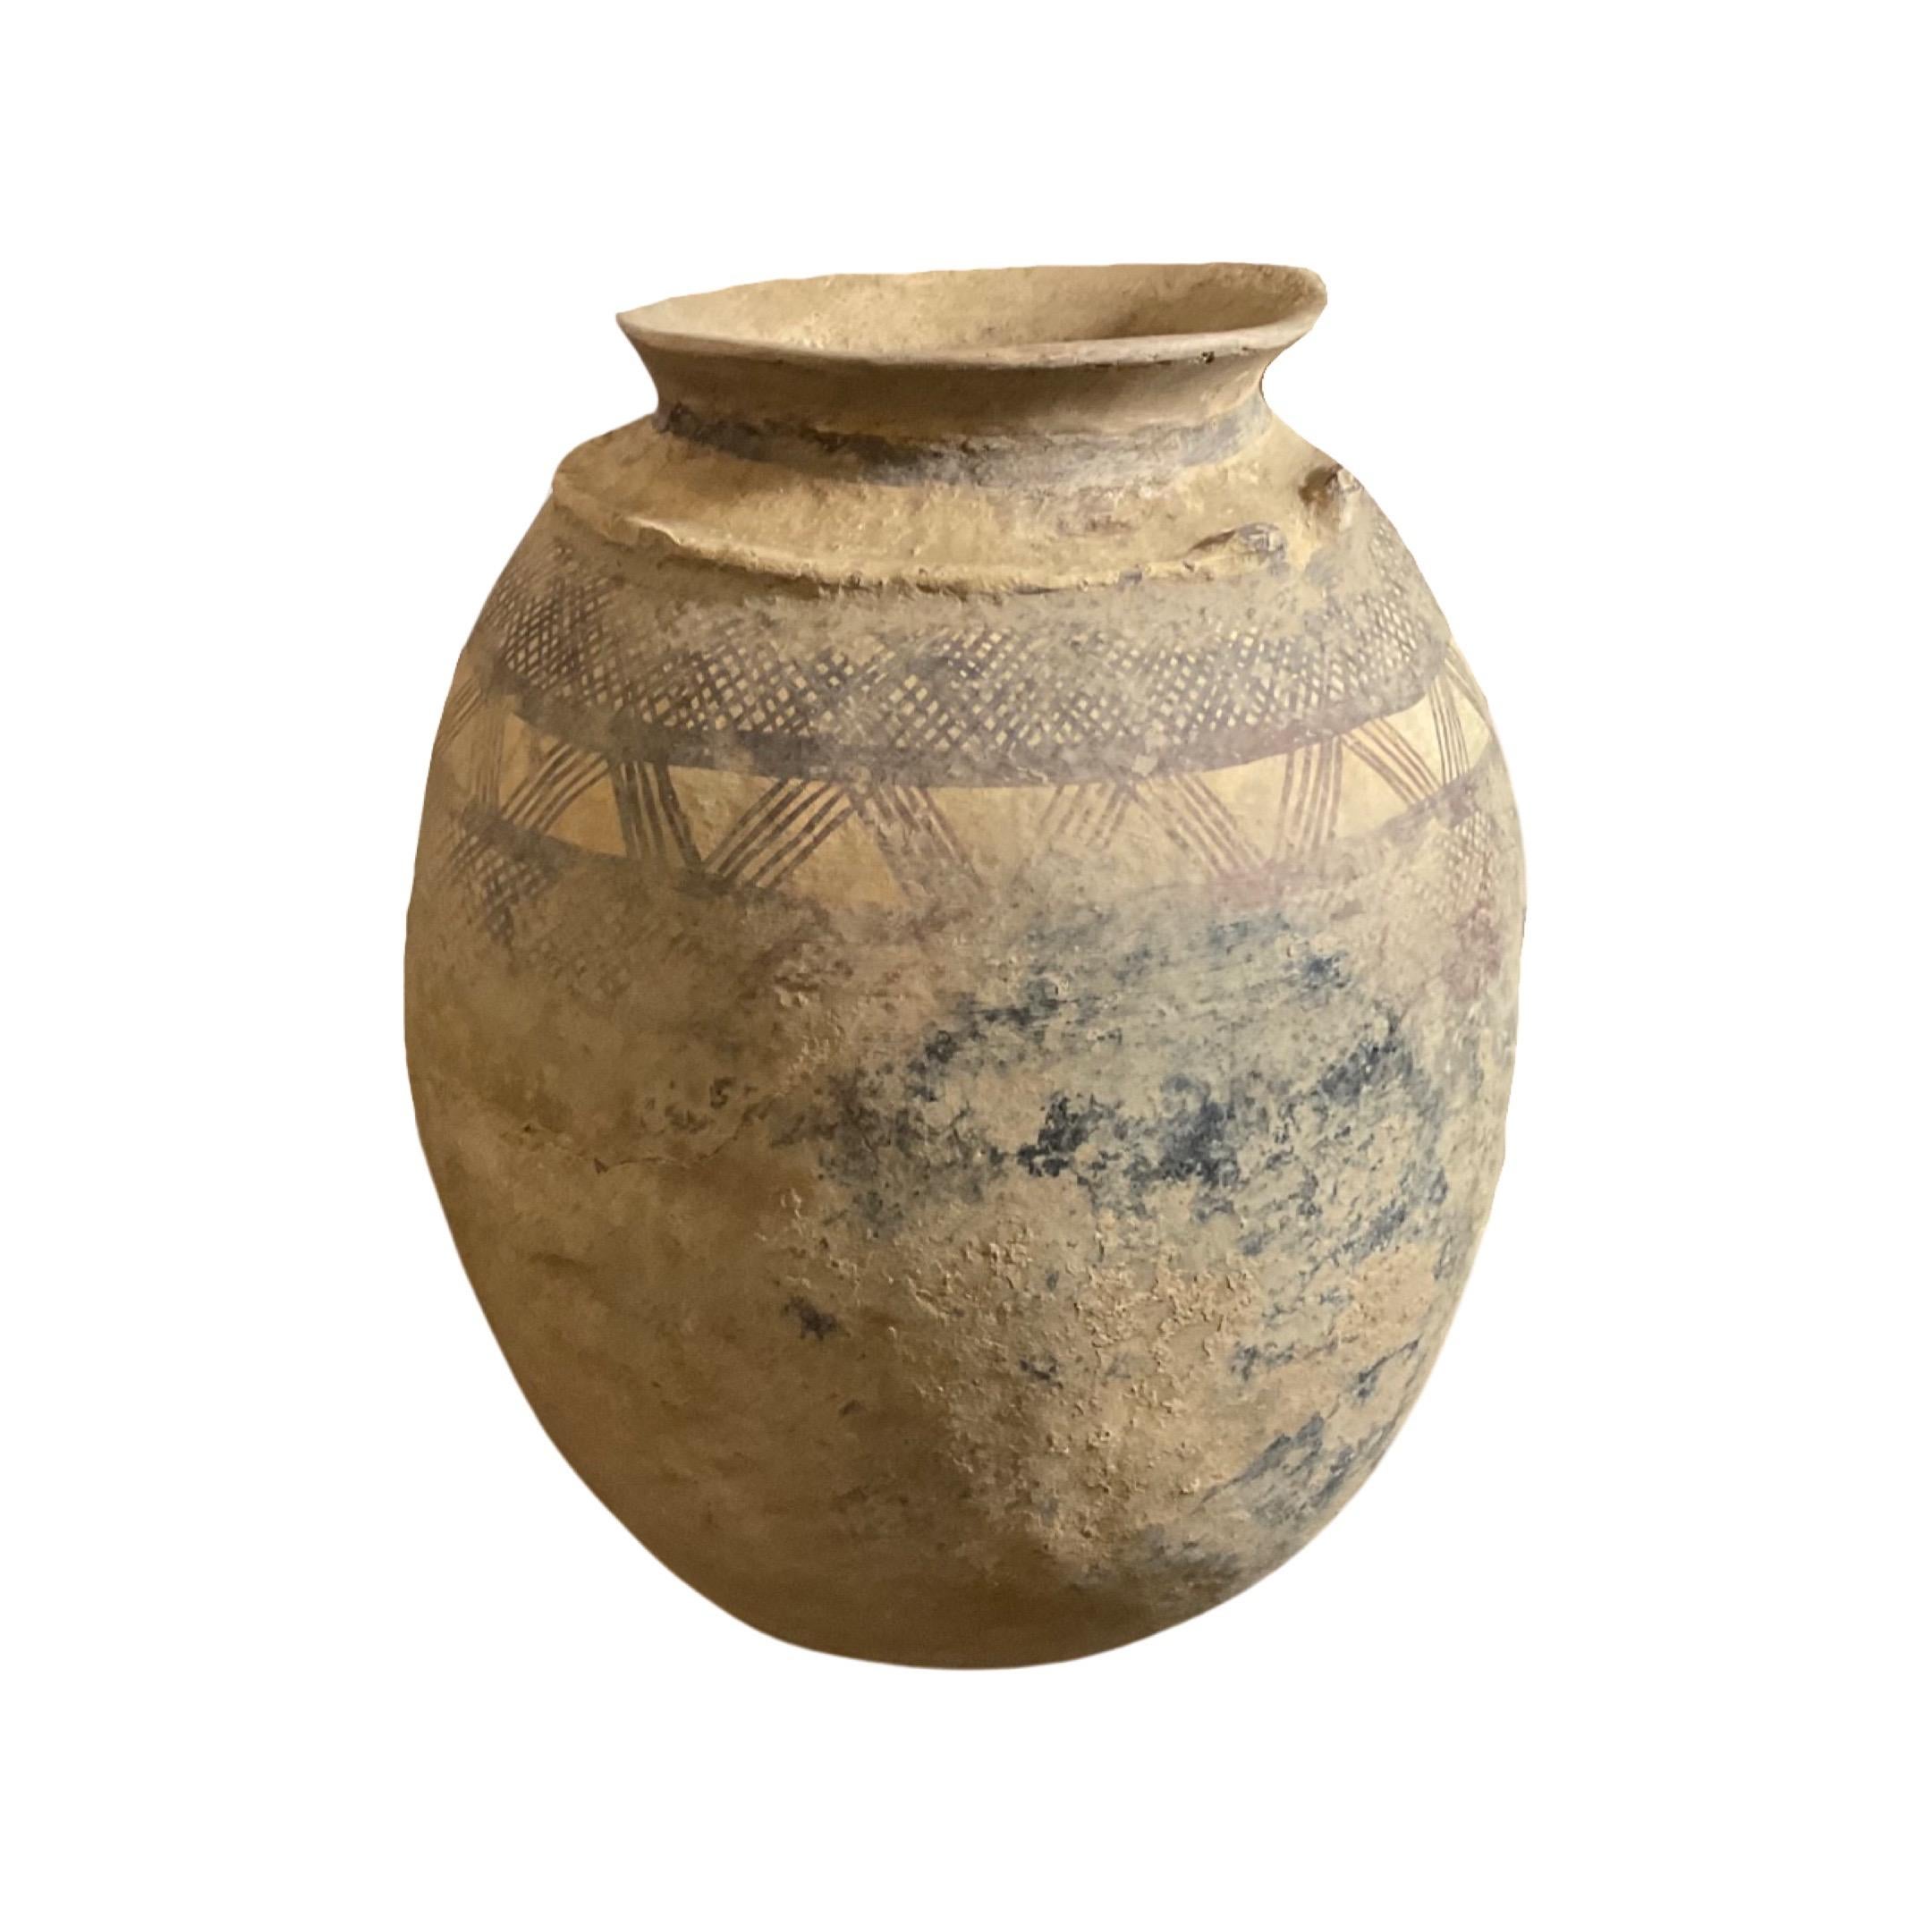 This antique North African terracotta vessel is a rare find, complete with a sturdy base holder for added stability. Its faded and unique African-inspired designs, dating back to the mid-1800s, add character and charm to any collection. Crafted